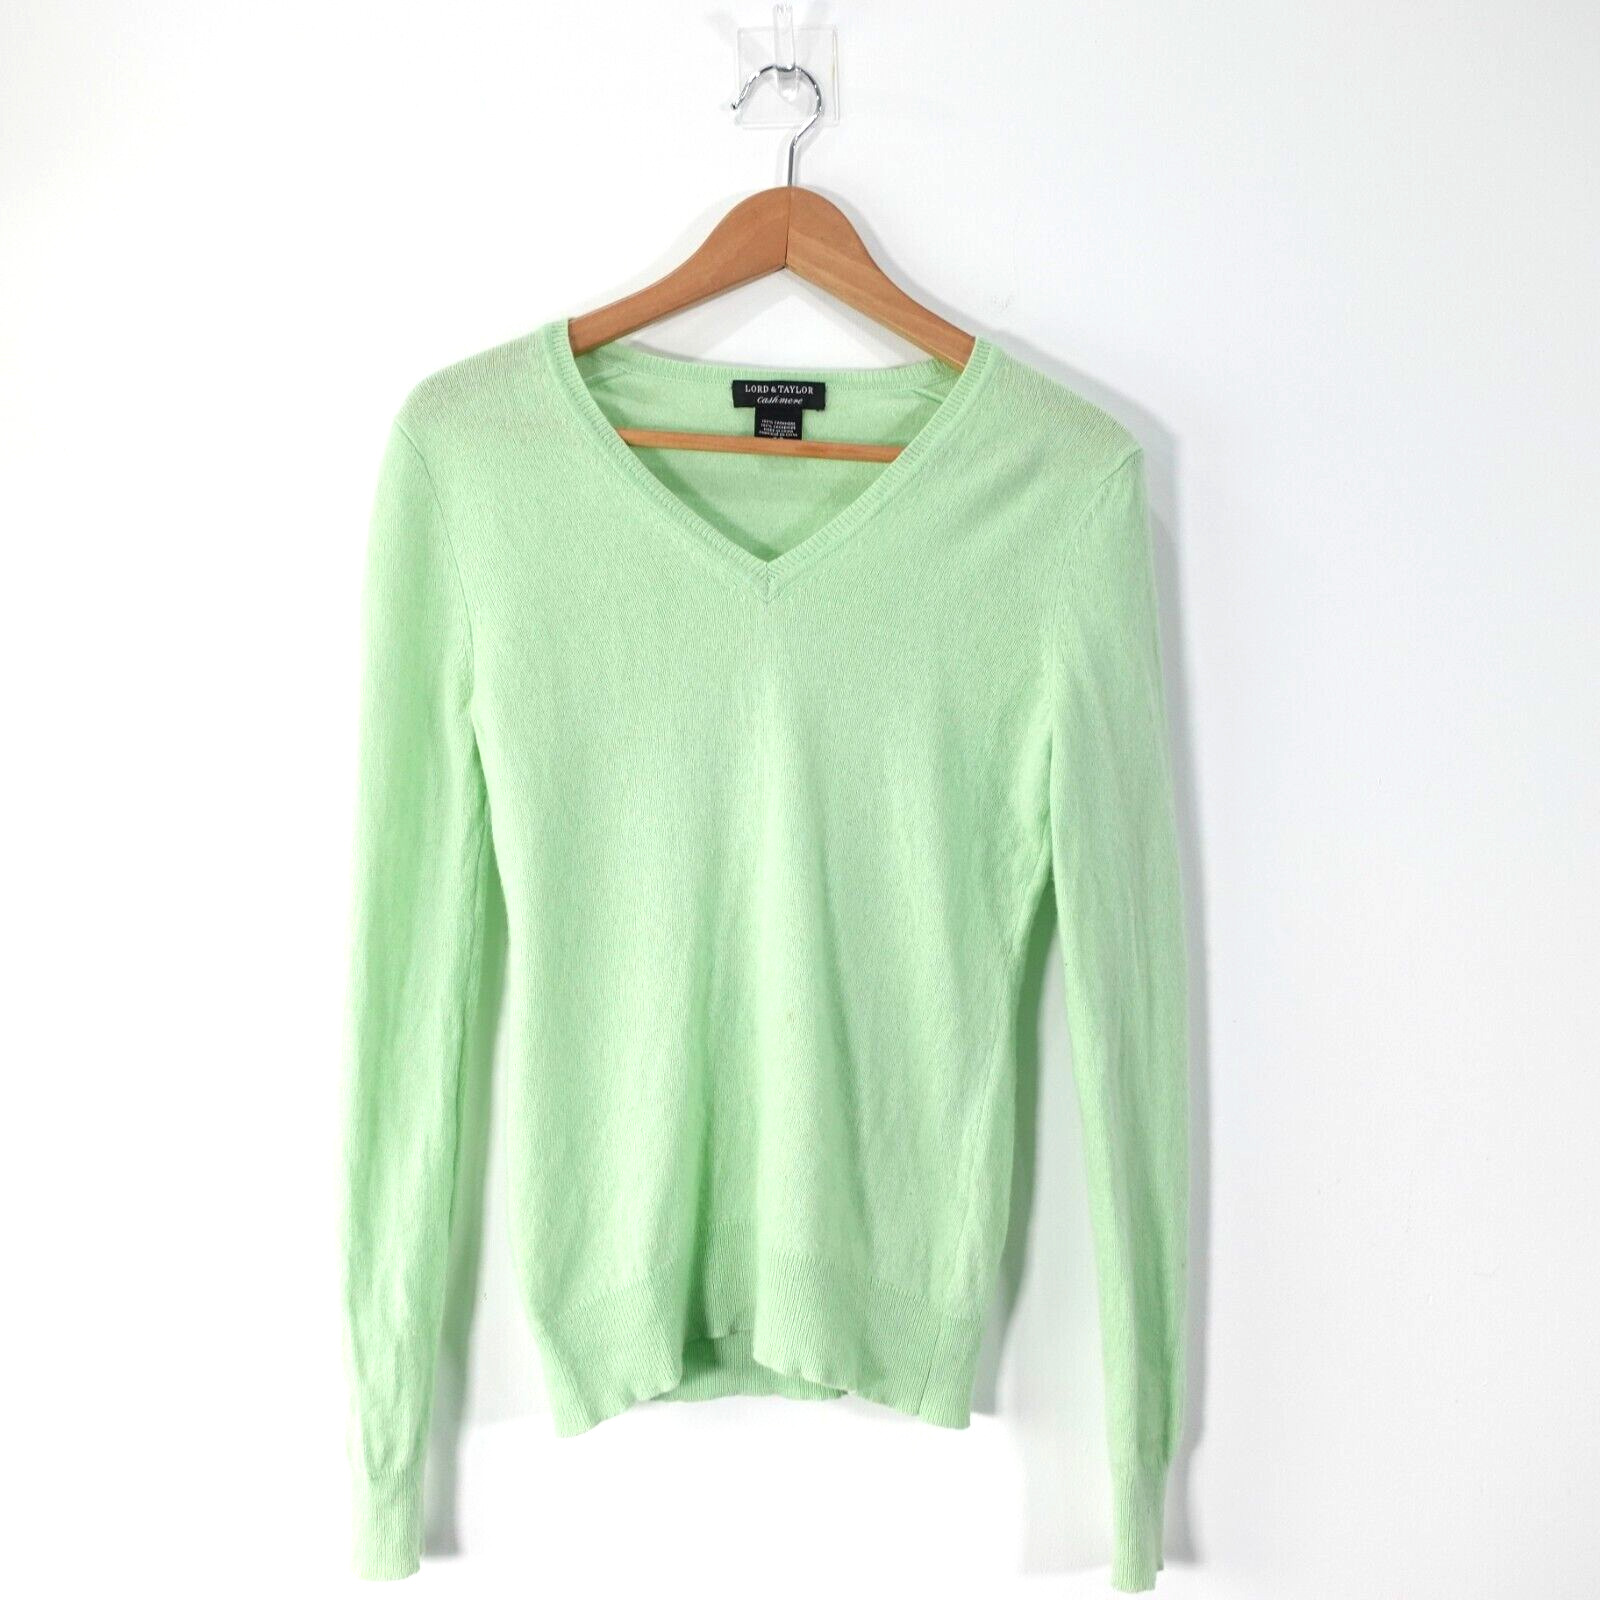 Cashmere Sweater Women Small Green Knit V Neck Pullover Casual Light Jumper L/S